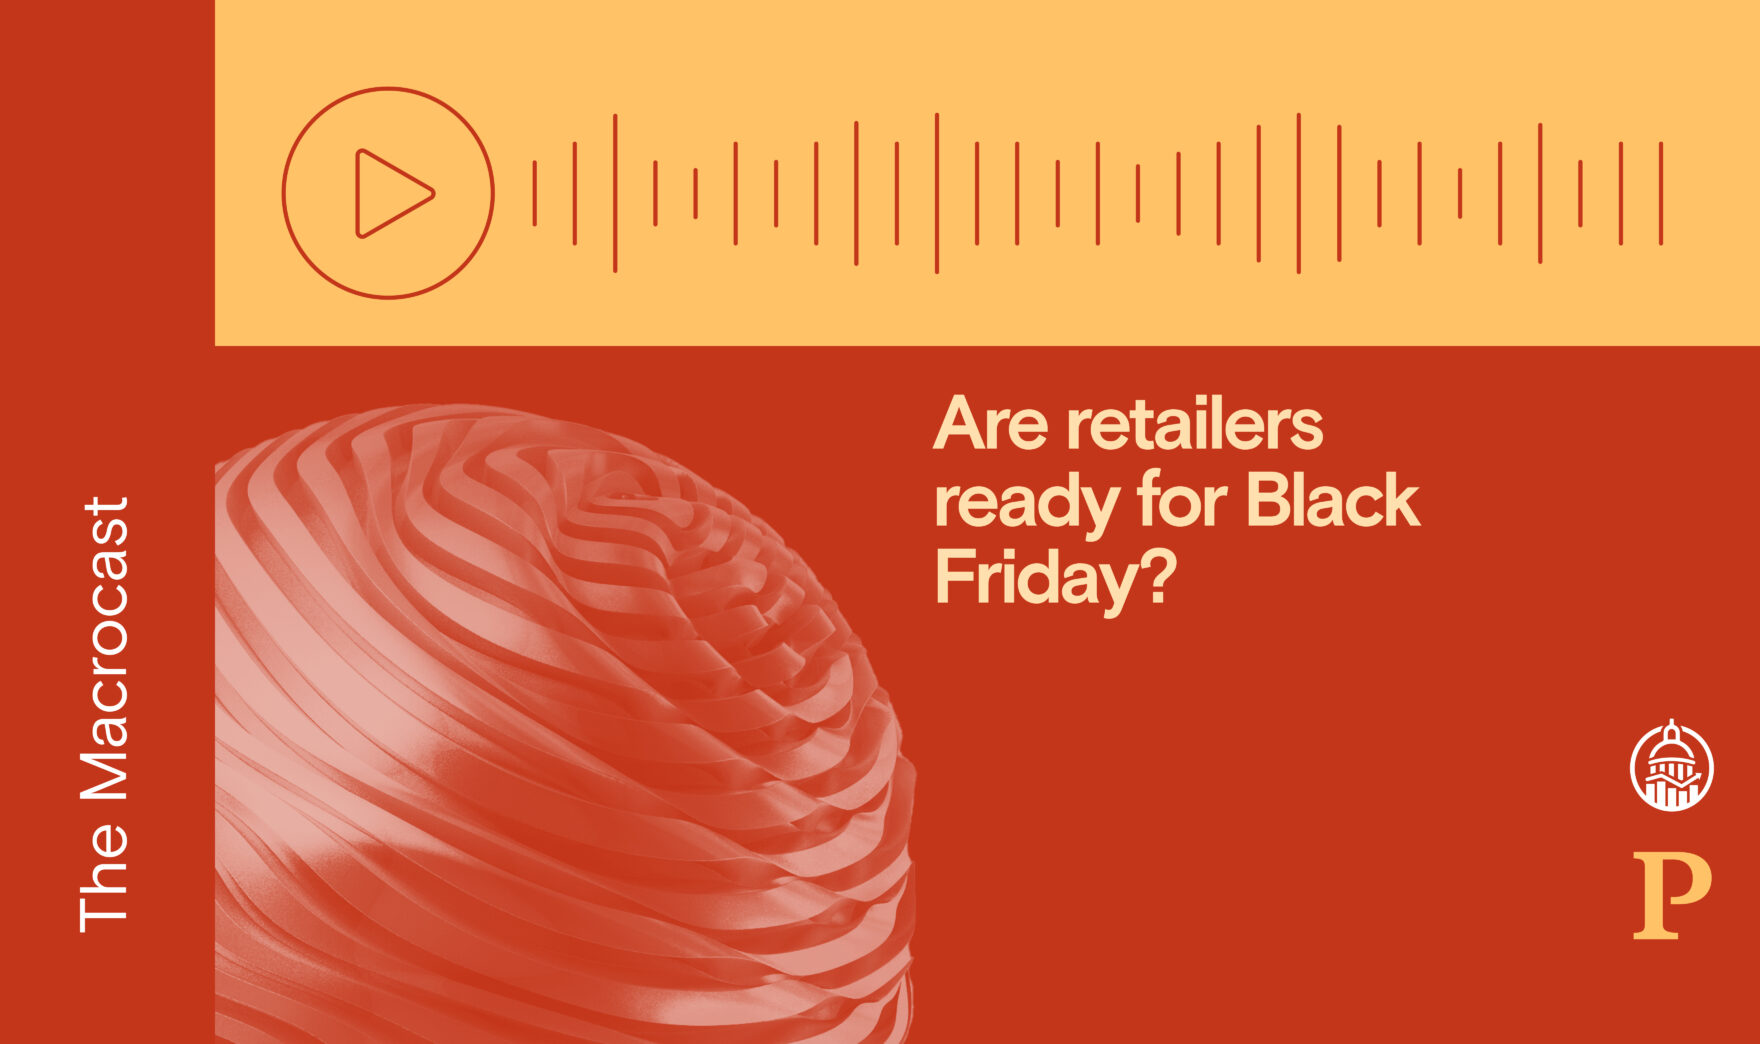 Are retailers ready for Black Friday?